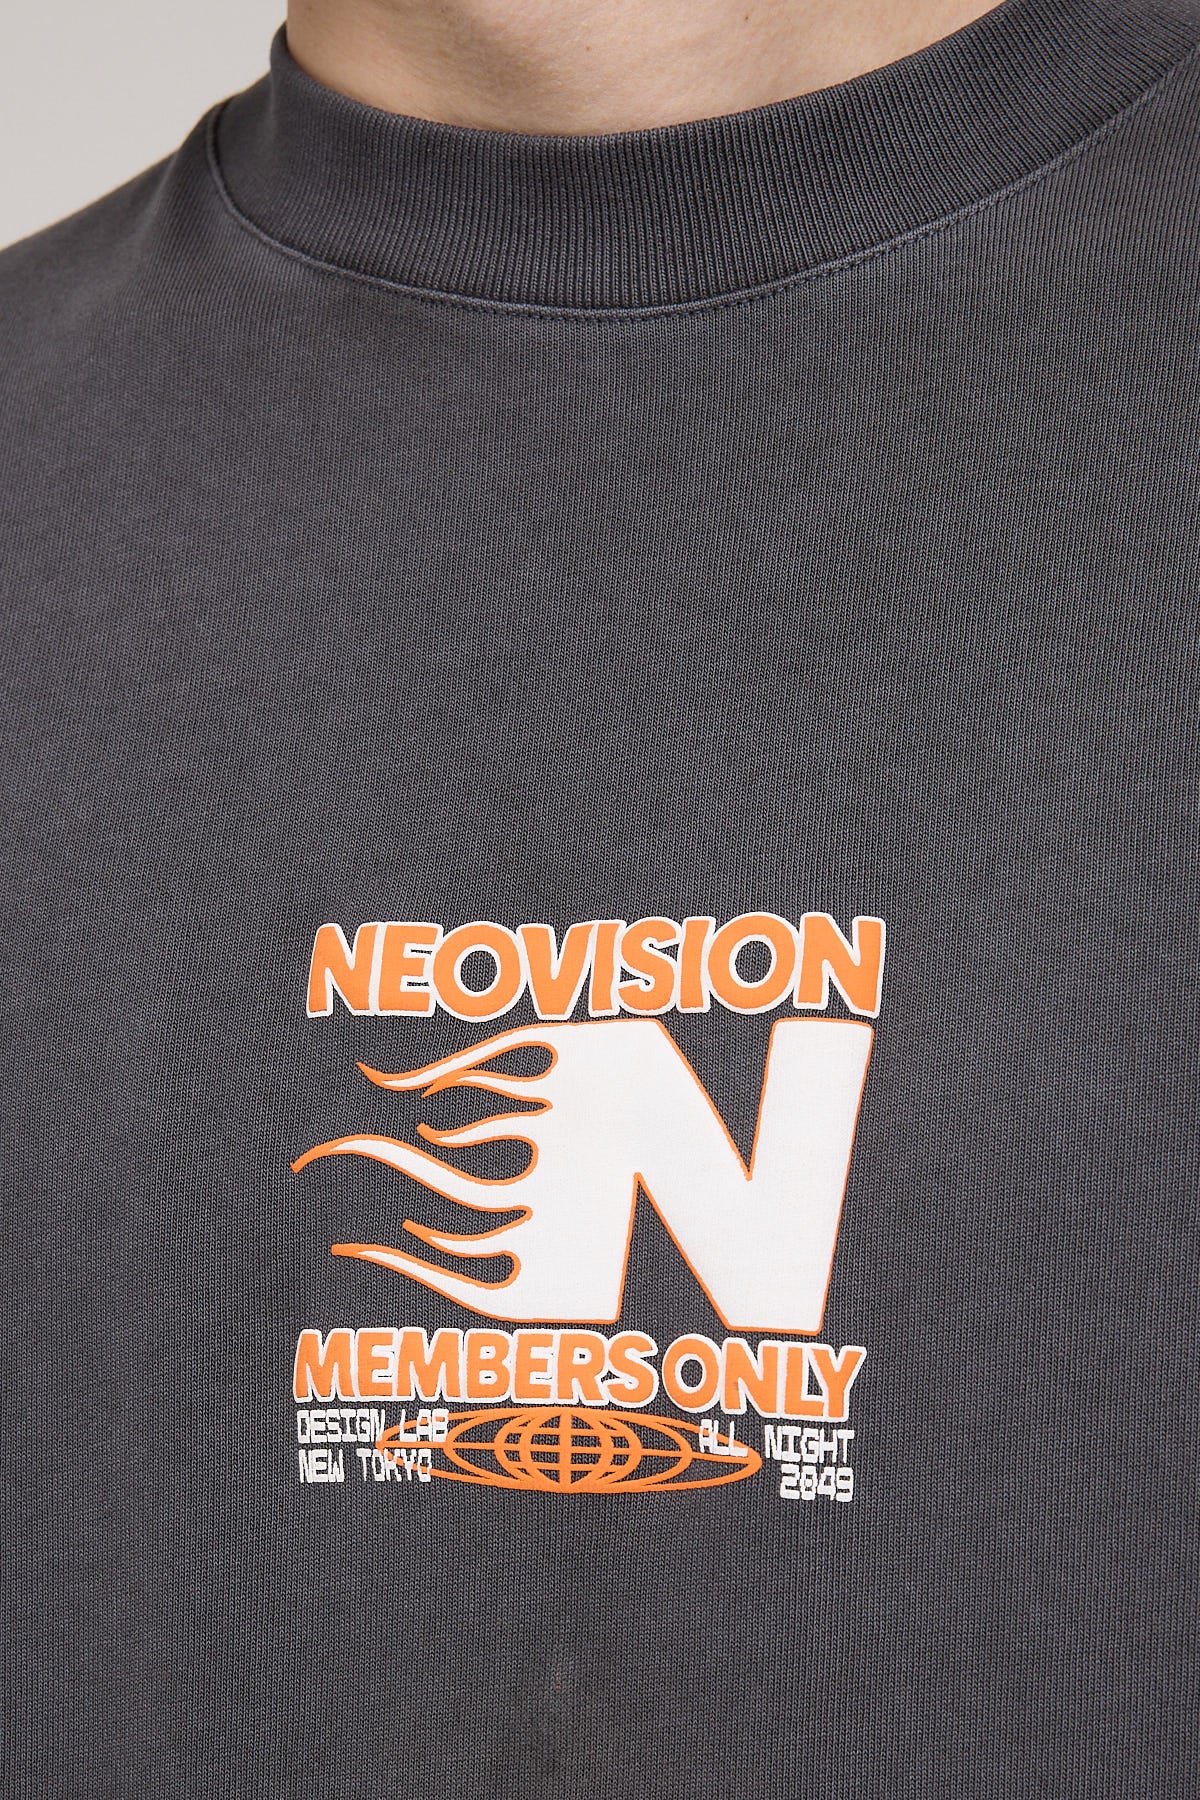 Neovision Members Only Street Super Heavy Tee Washed Black